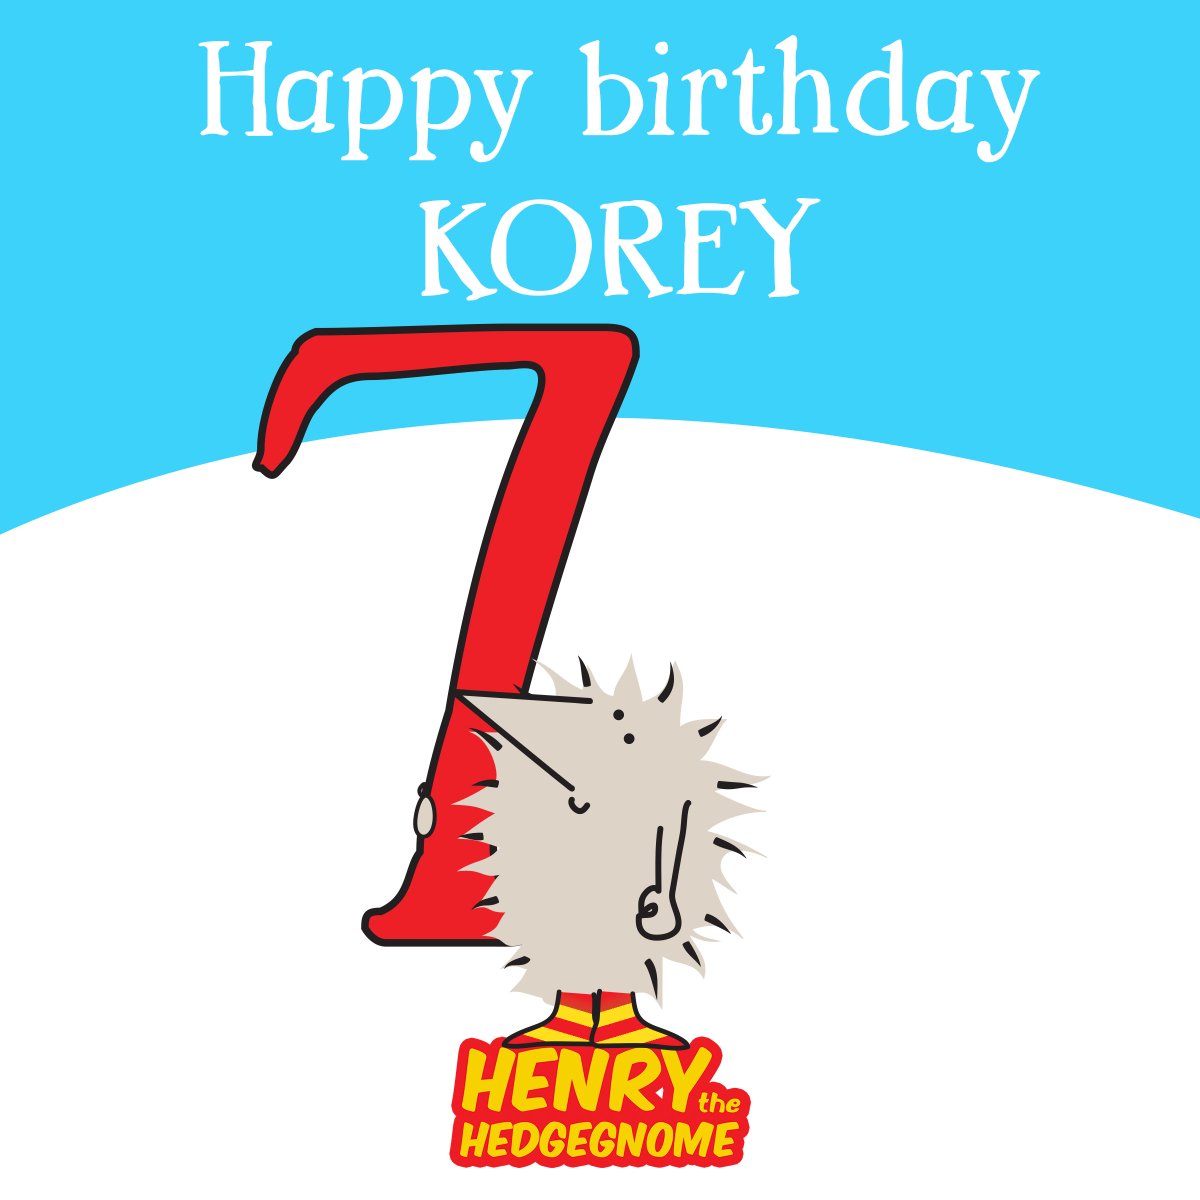 A Henry the Hedgegnome fan receives a birthday greeting from his favourite hedgehog superstar. Happy birthday, Korey, from everyone at Hedgegnome HQ.

#childrensbooks #bedtimestories #hedgehog #childrensauthor #childrenspublishing #picturebooks #learntoread #earlyreaders